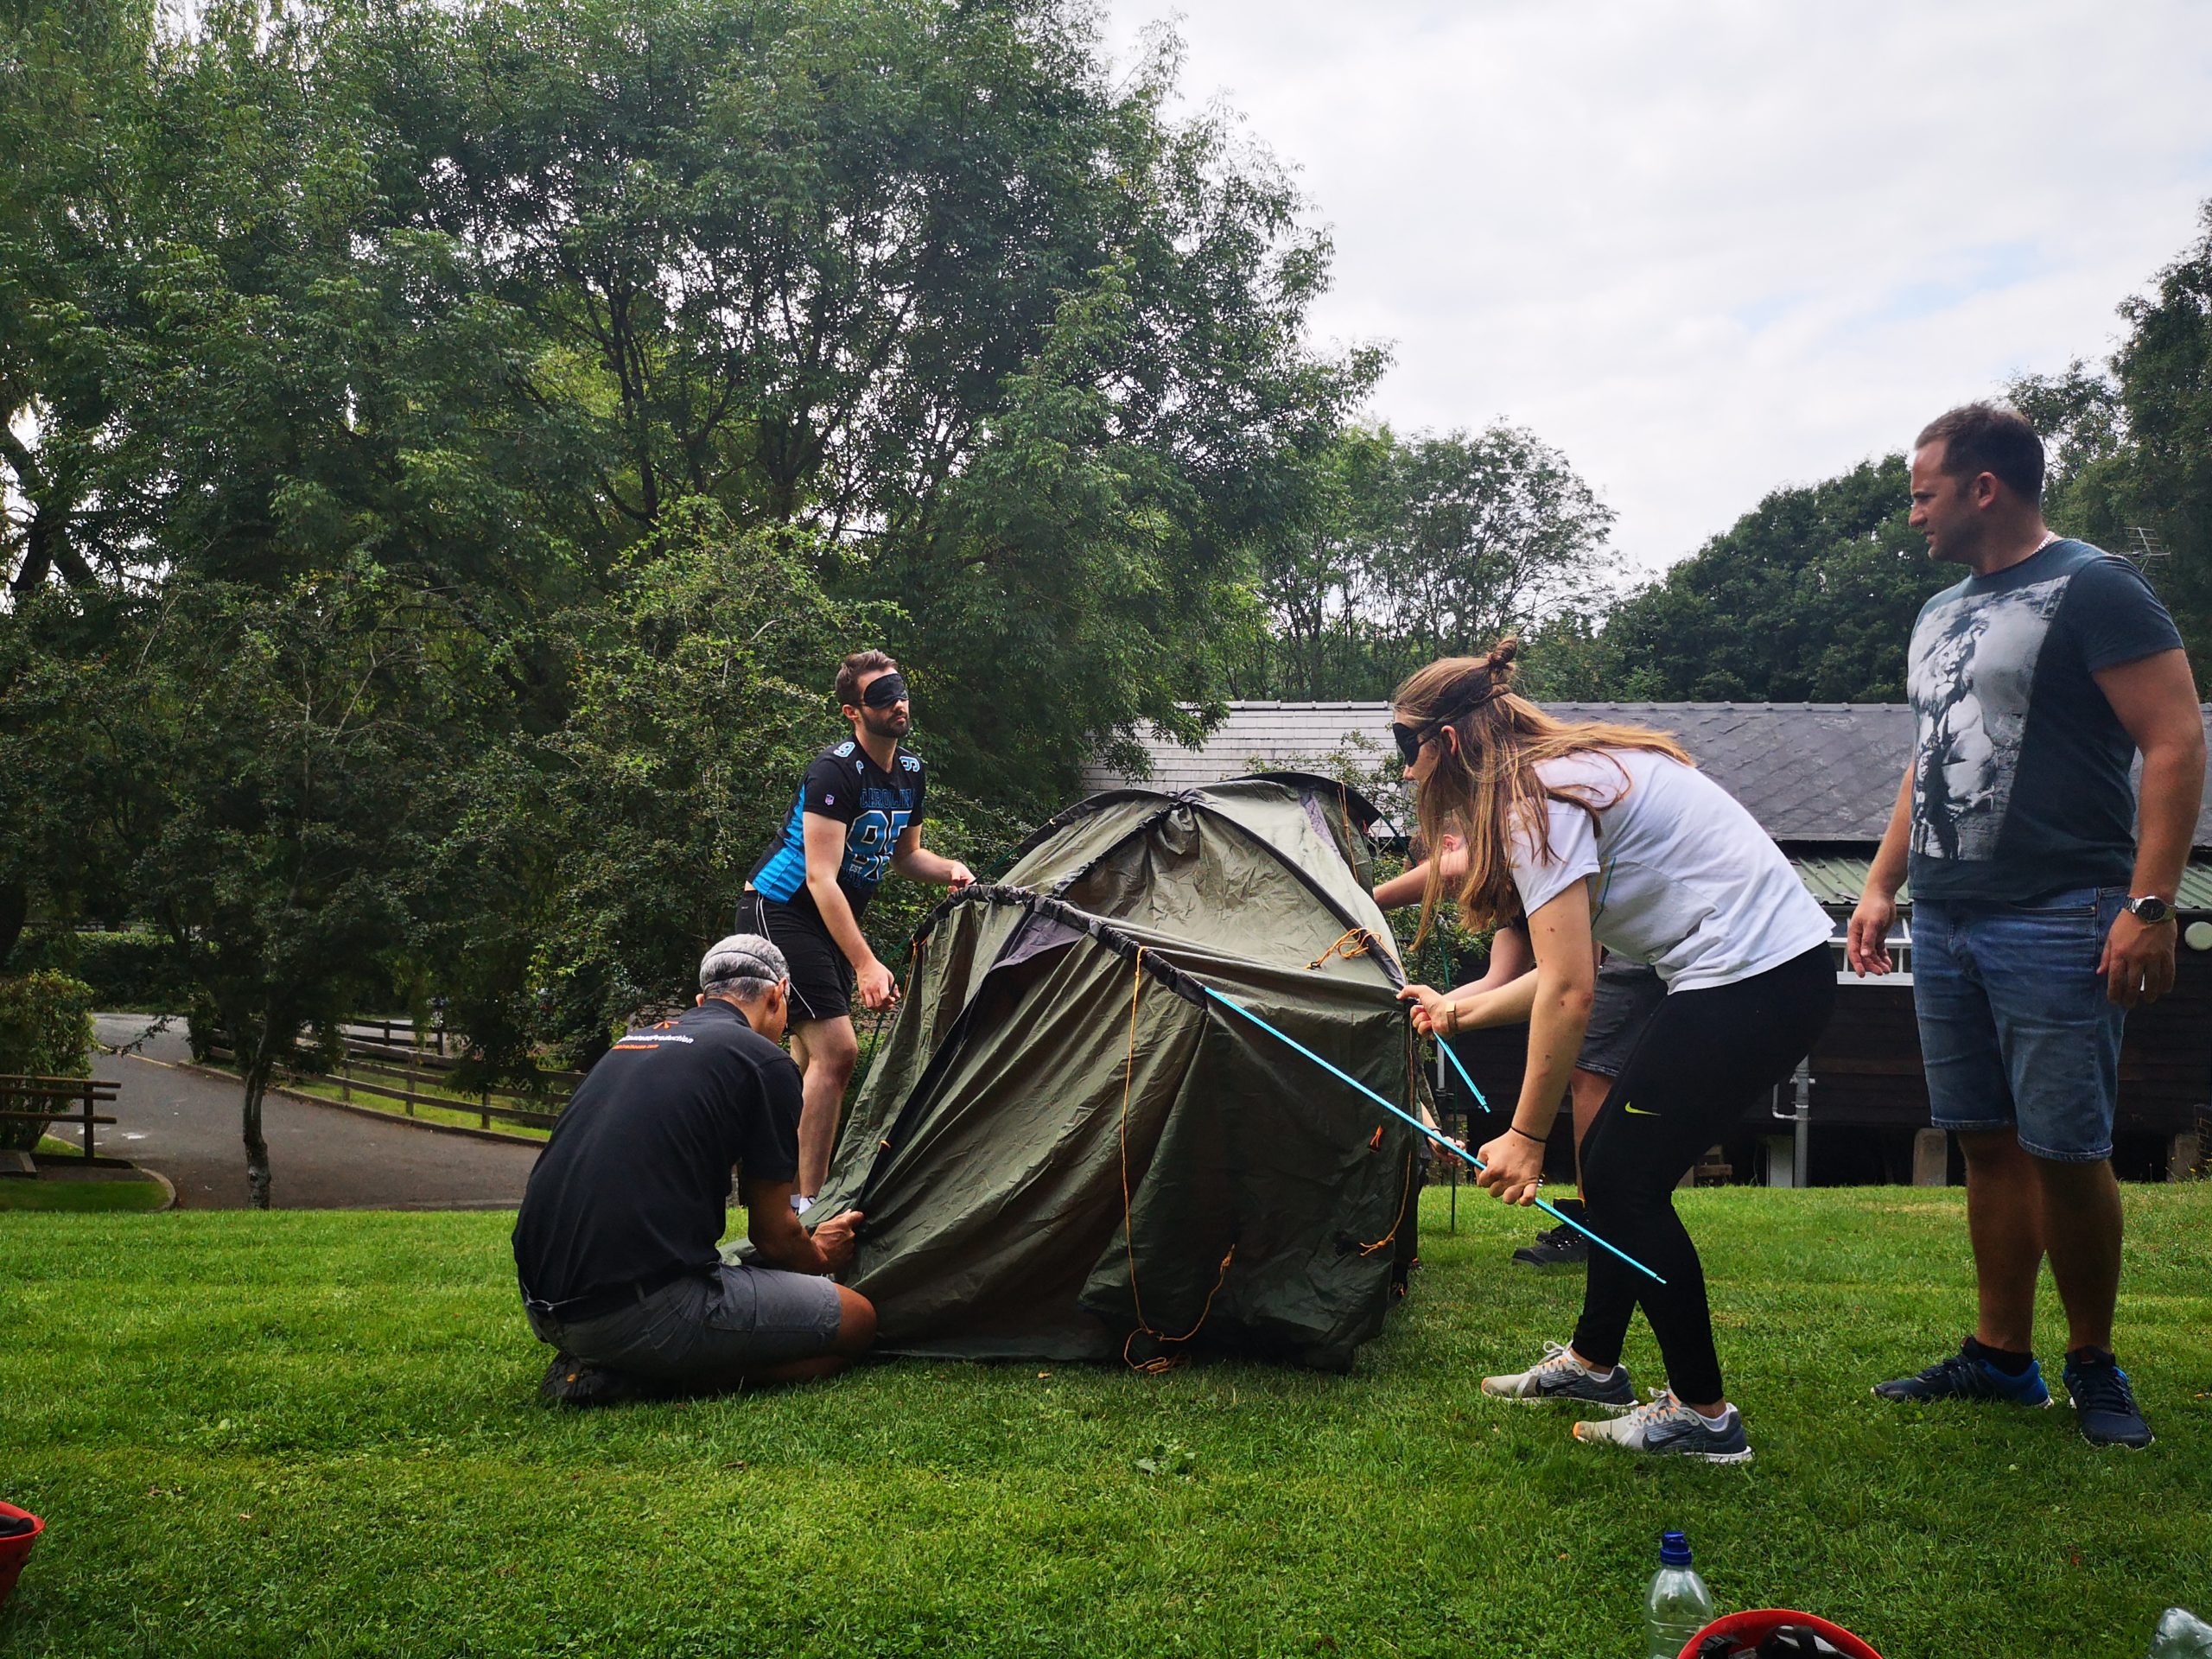 Group setting up a tent